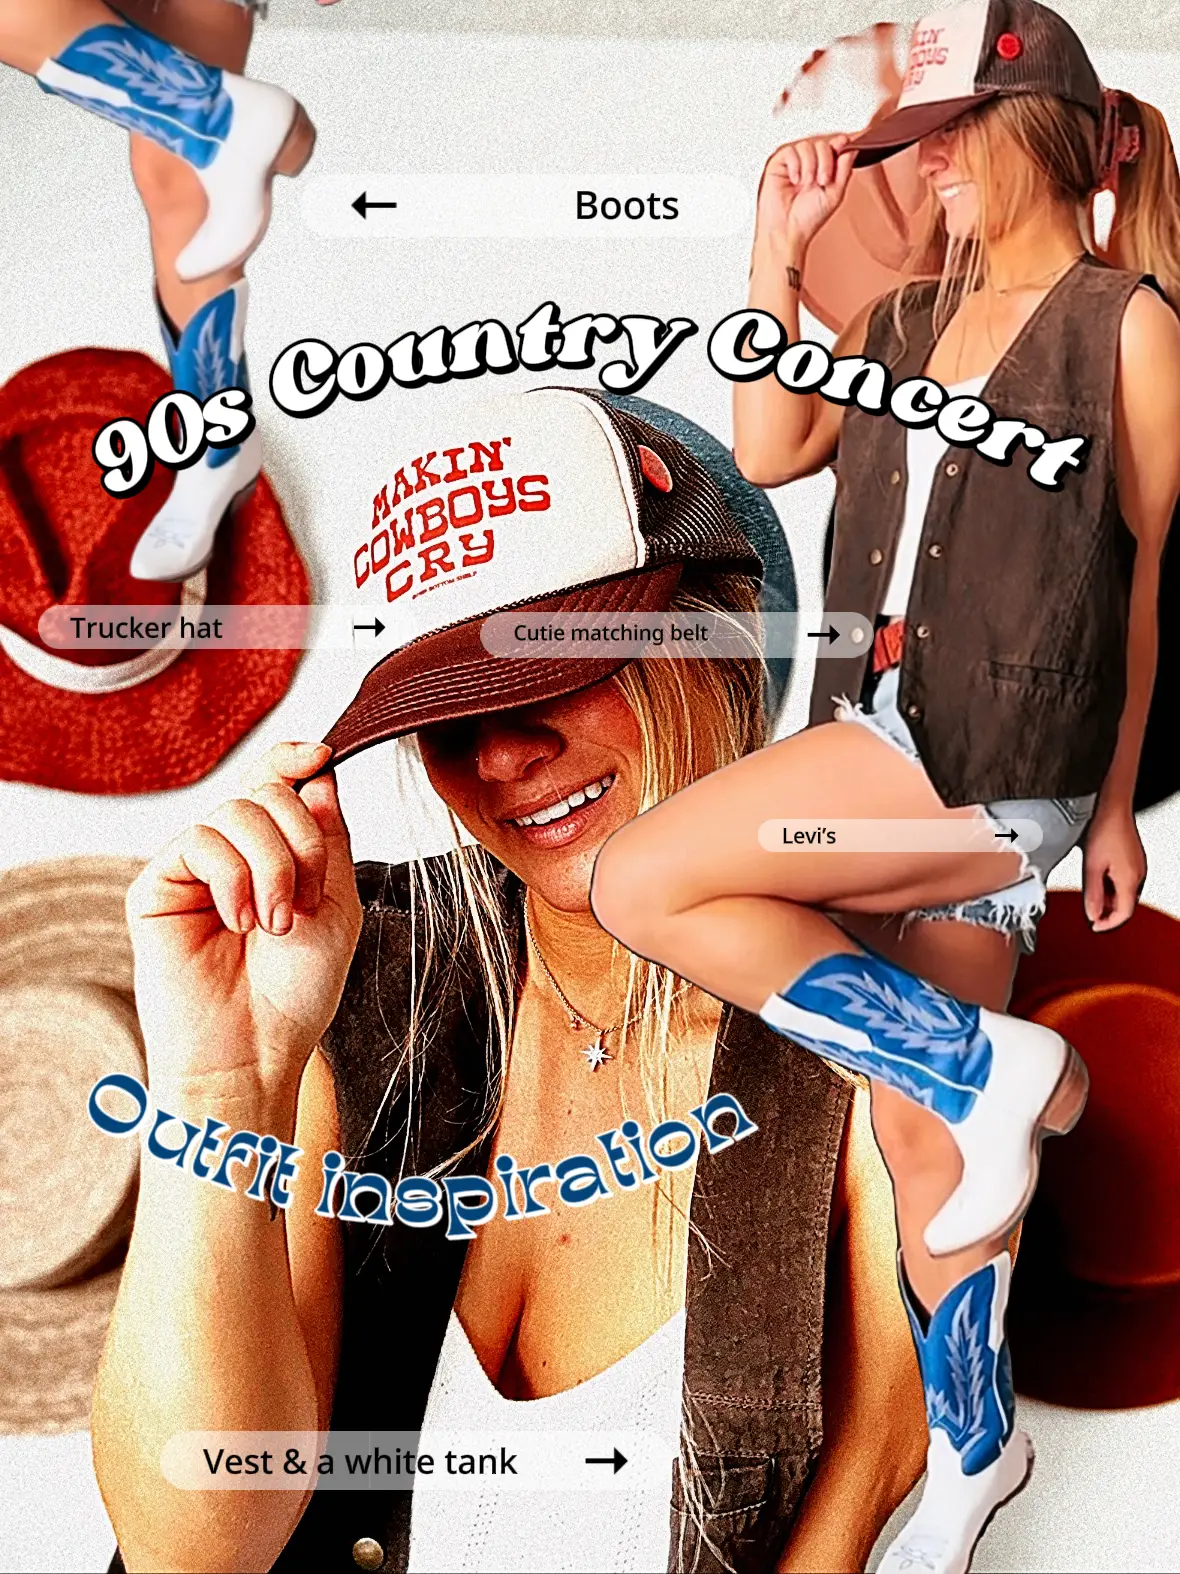 Country Concert Outfit Inspo. 🤠🇺🇸🍻's images